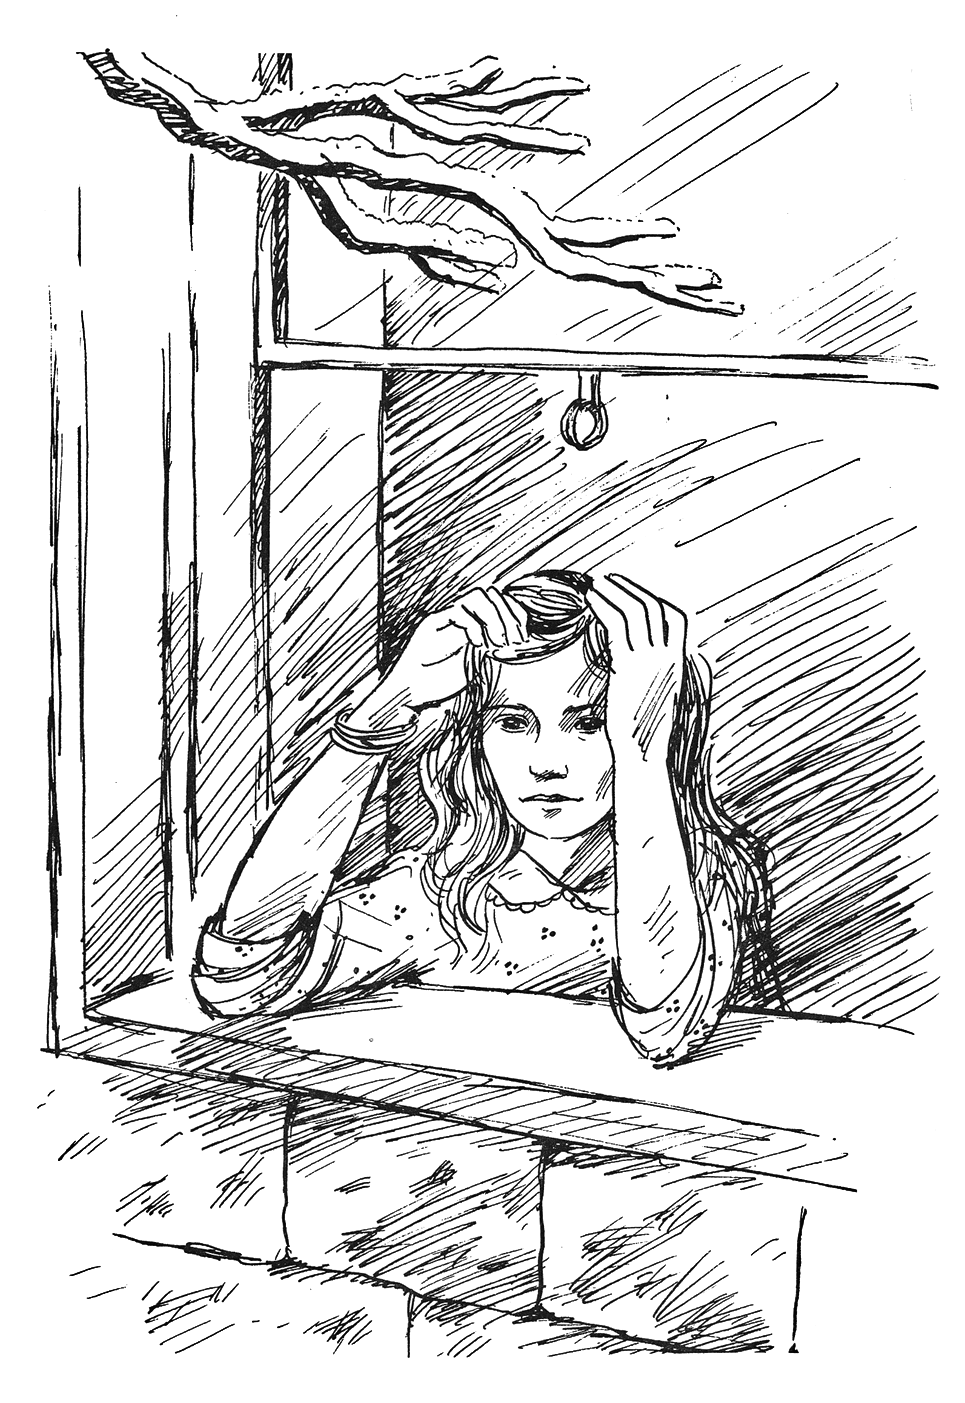 Drawing of a girl looking out an open window.